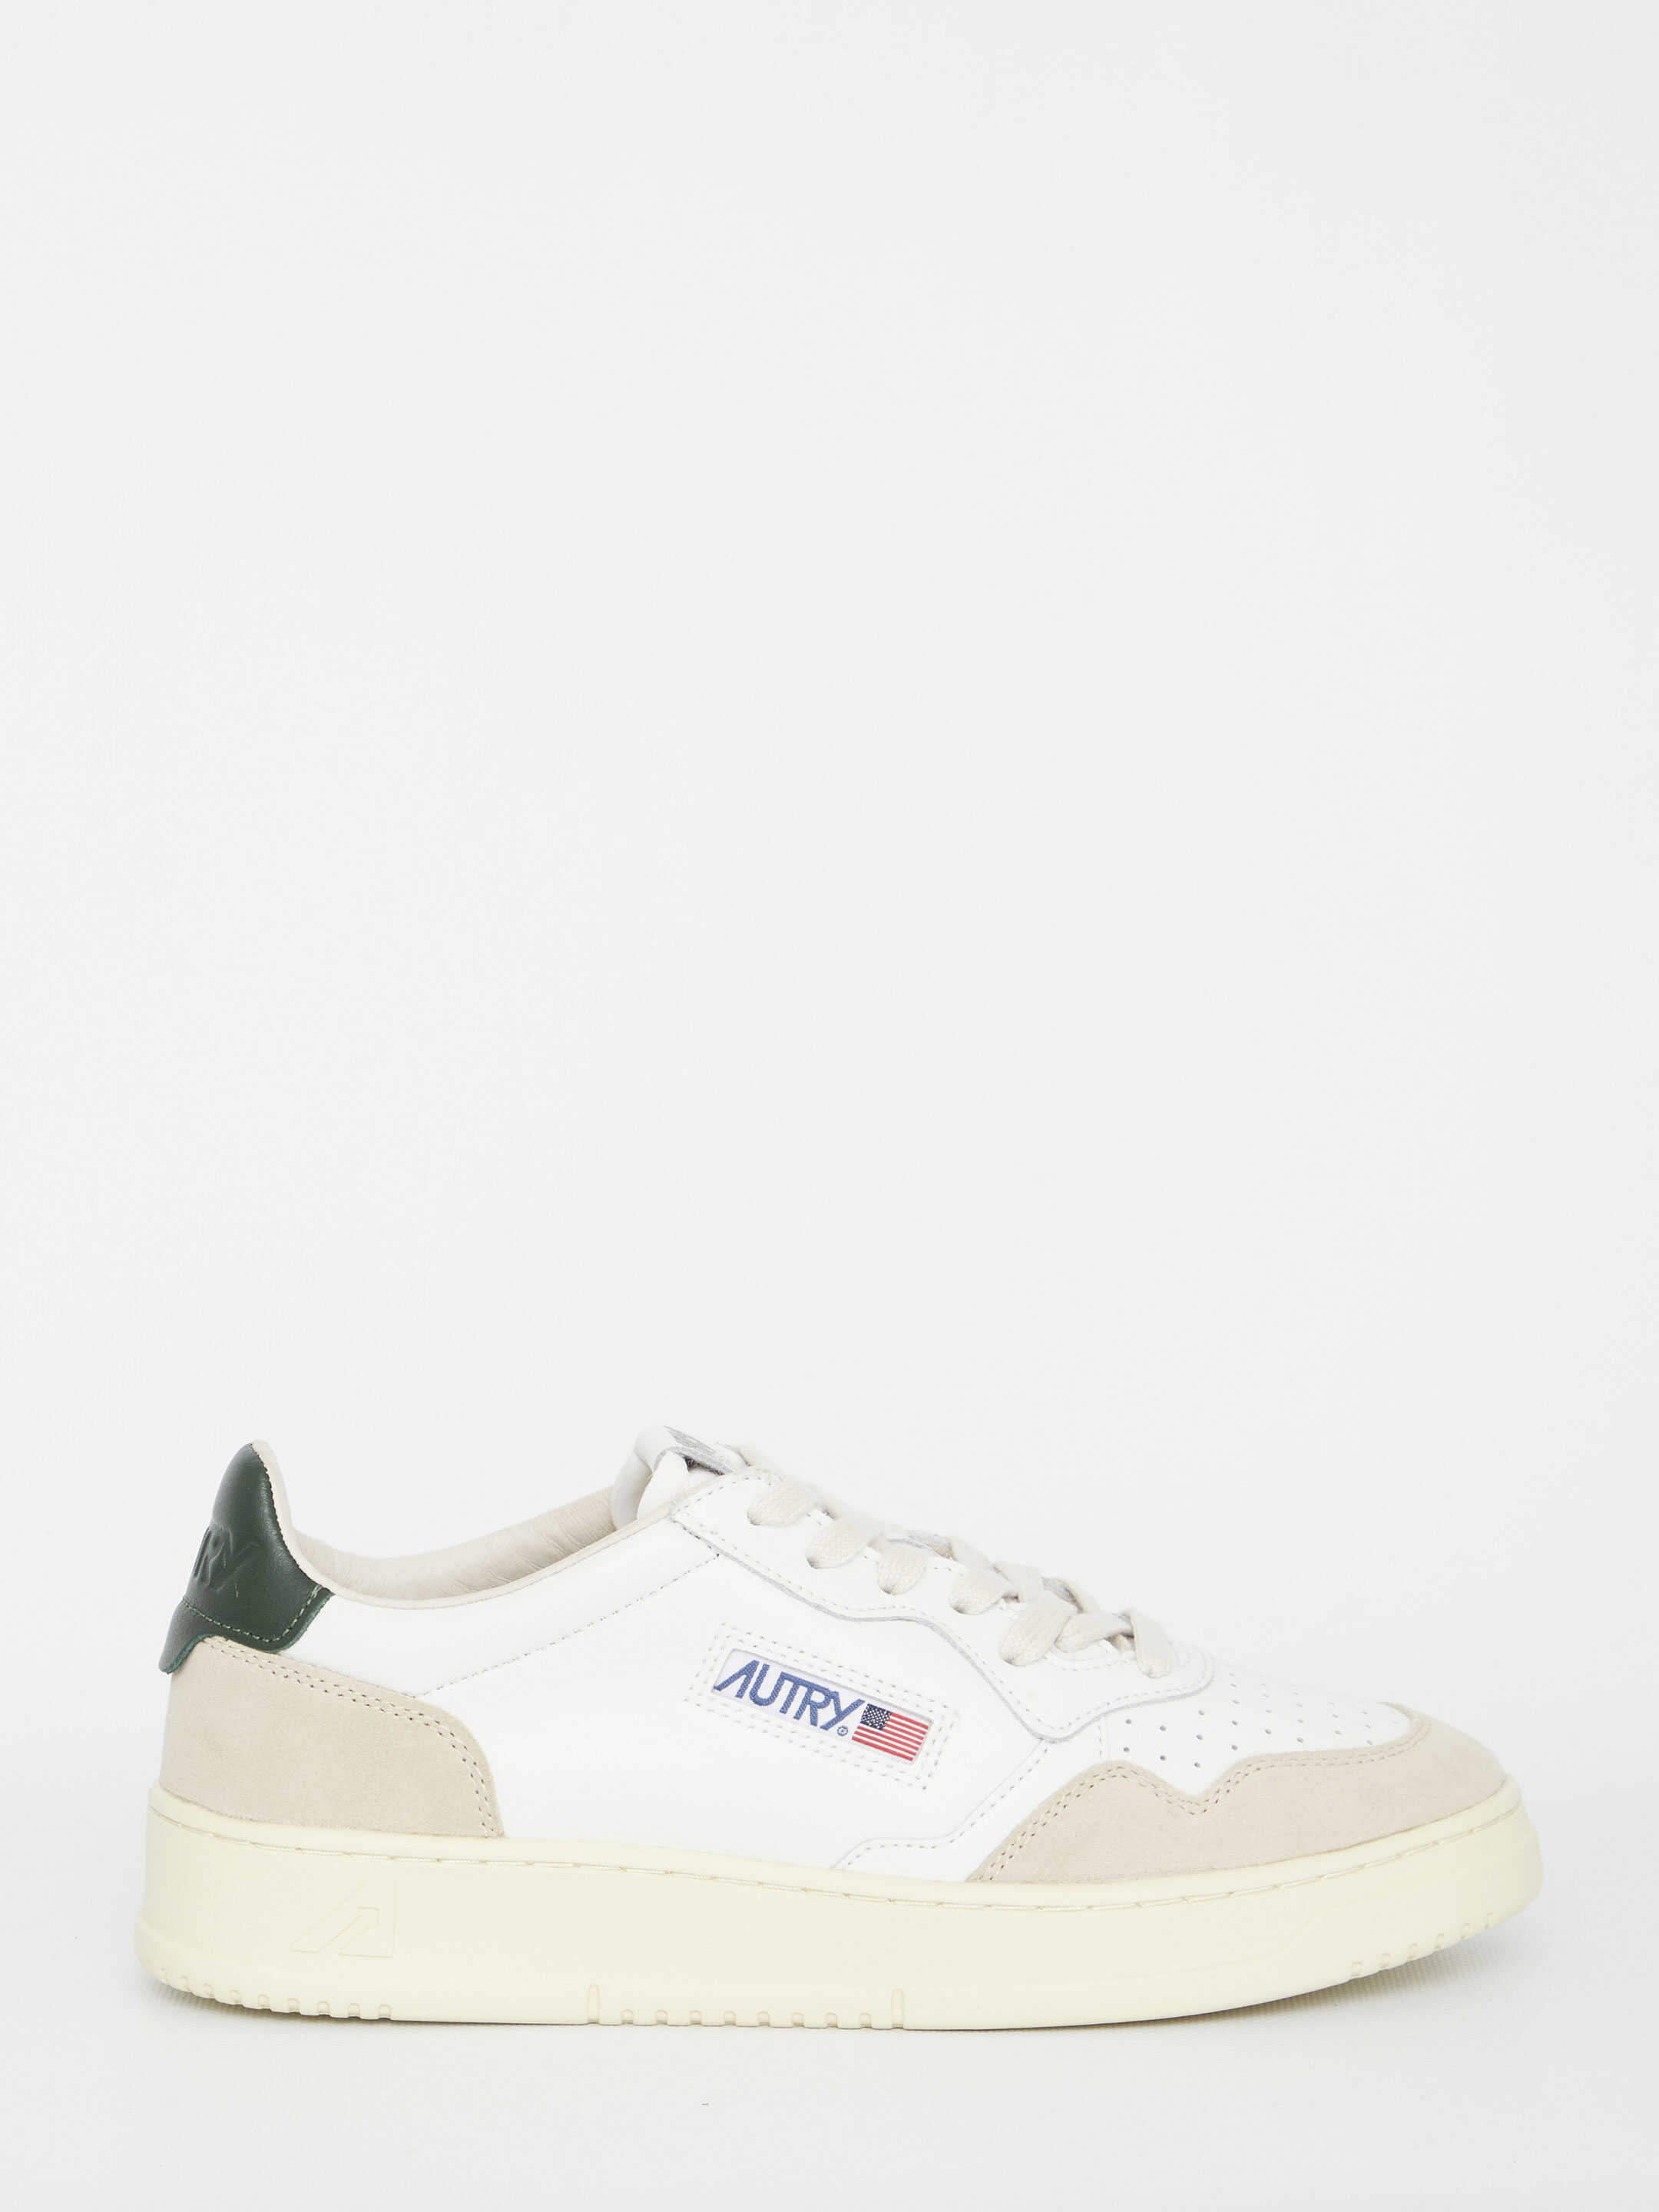 AUTRY Medalist Suede Sneakers WHITE